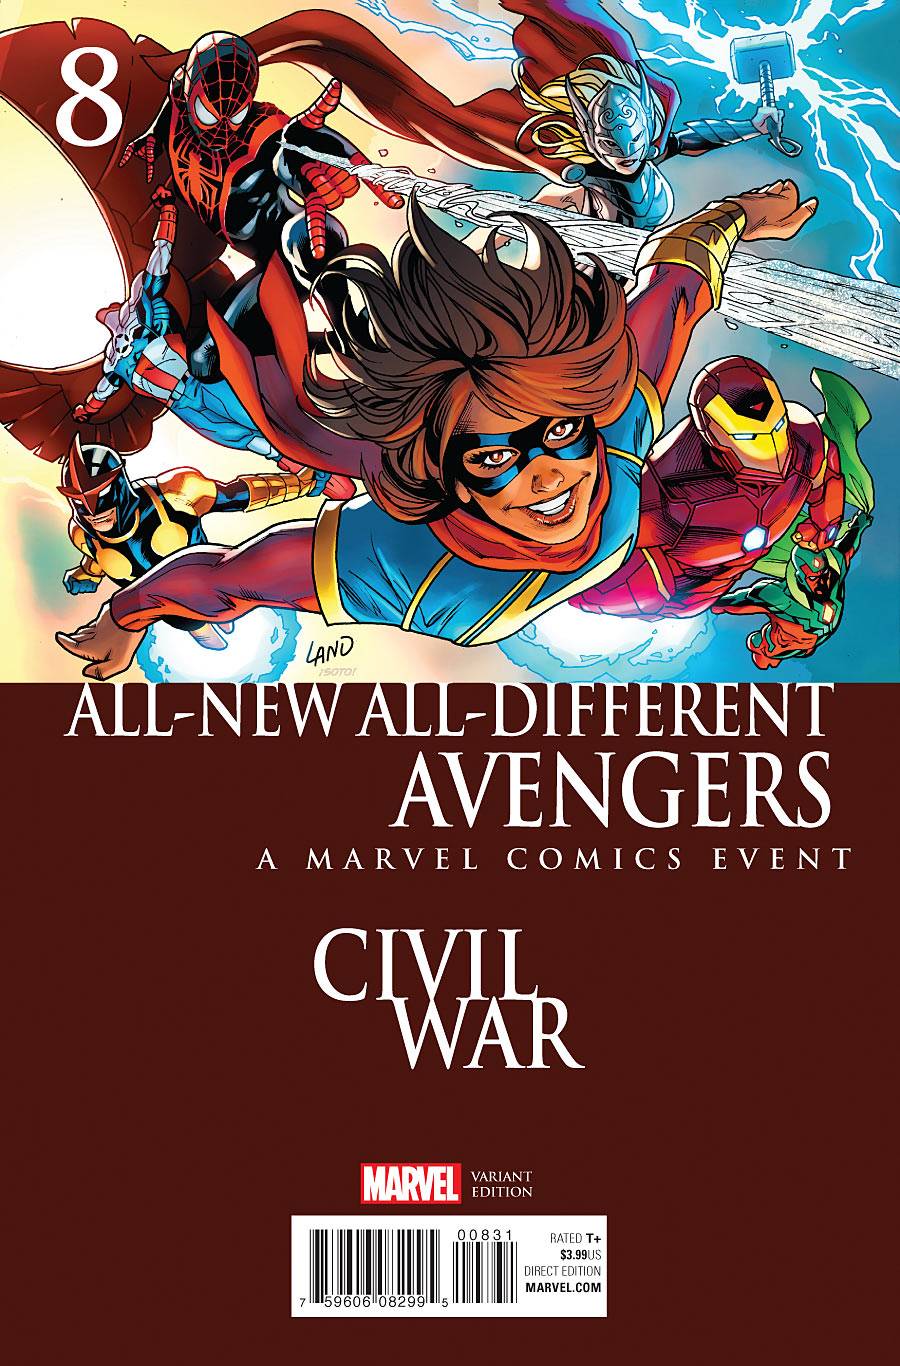 All New All Different Avengers #8 Mayhew Civil War Variant Aso